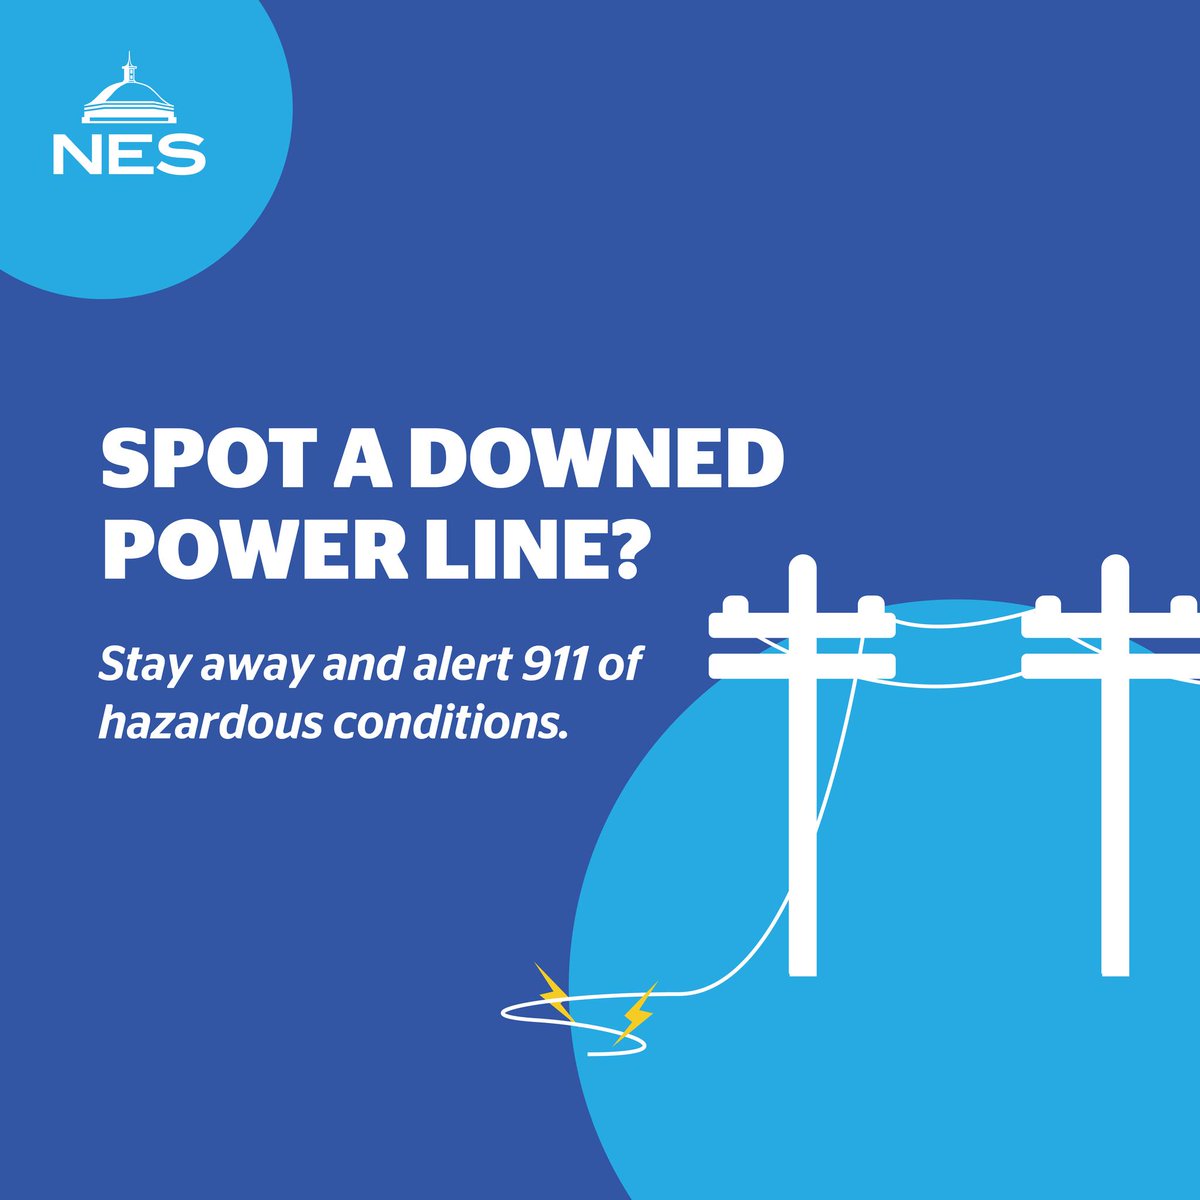 Heavy winds can easily knock tree limbs and other vegetation into power lines, dropping them to the ground or other surfaces. If you come across a downed power line, always assume it is live and keep everyone away from the area, including pets! Call 9-1-1 to report the damaged…